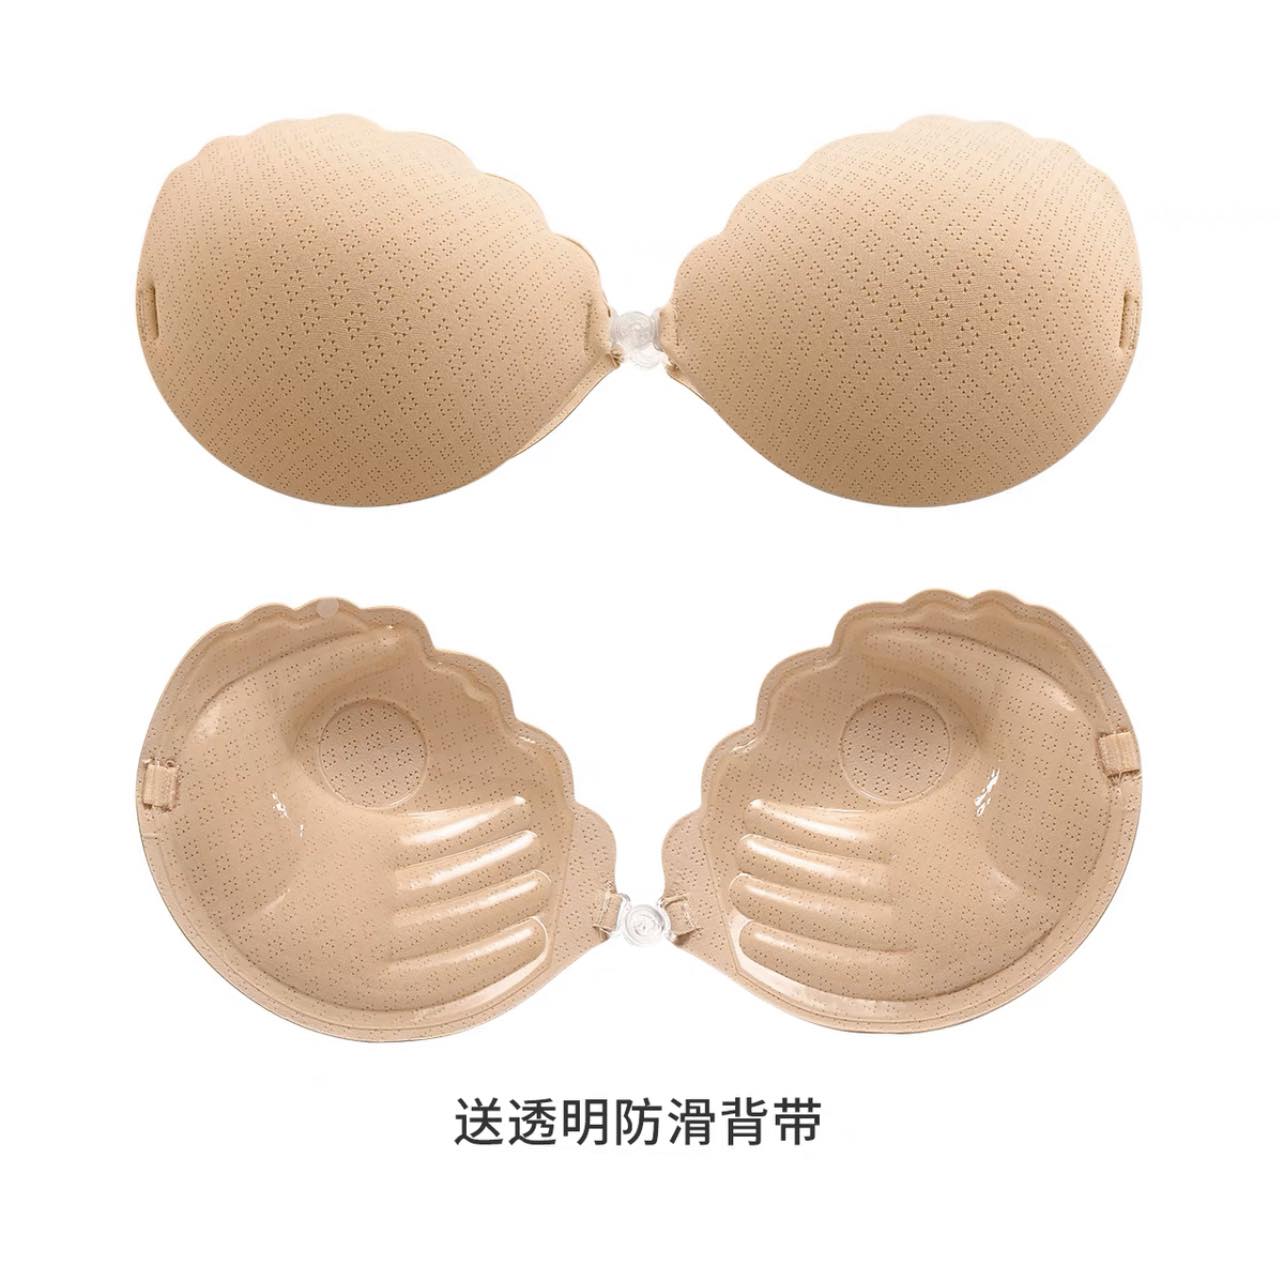 Ulike silicone bra with box and strap Push up Makapal